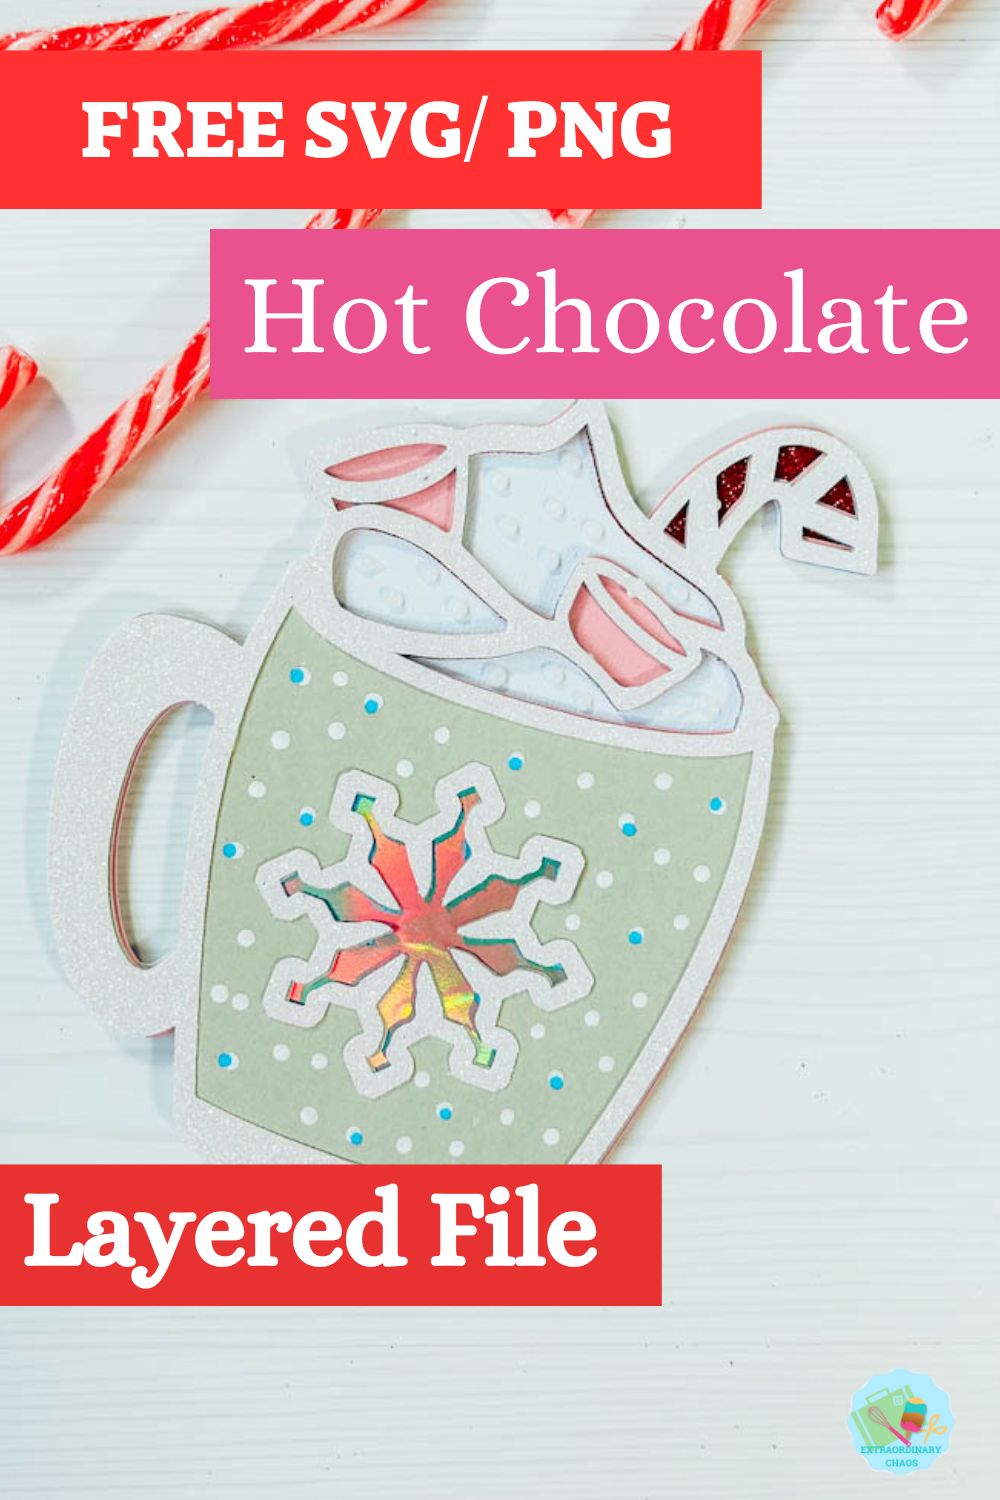 Free SVG PNG Hot Chocolate Layered File